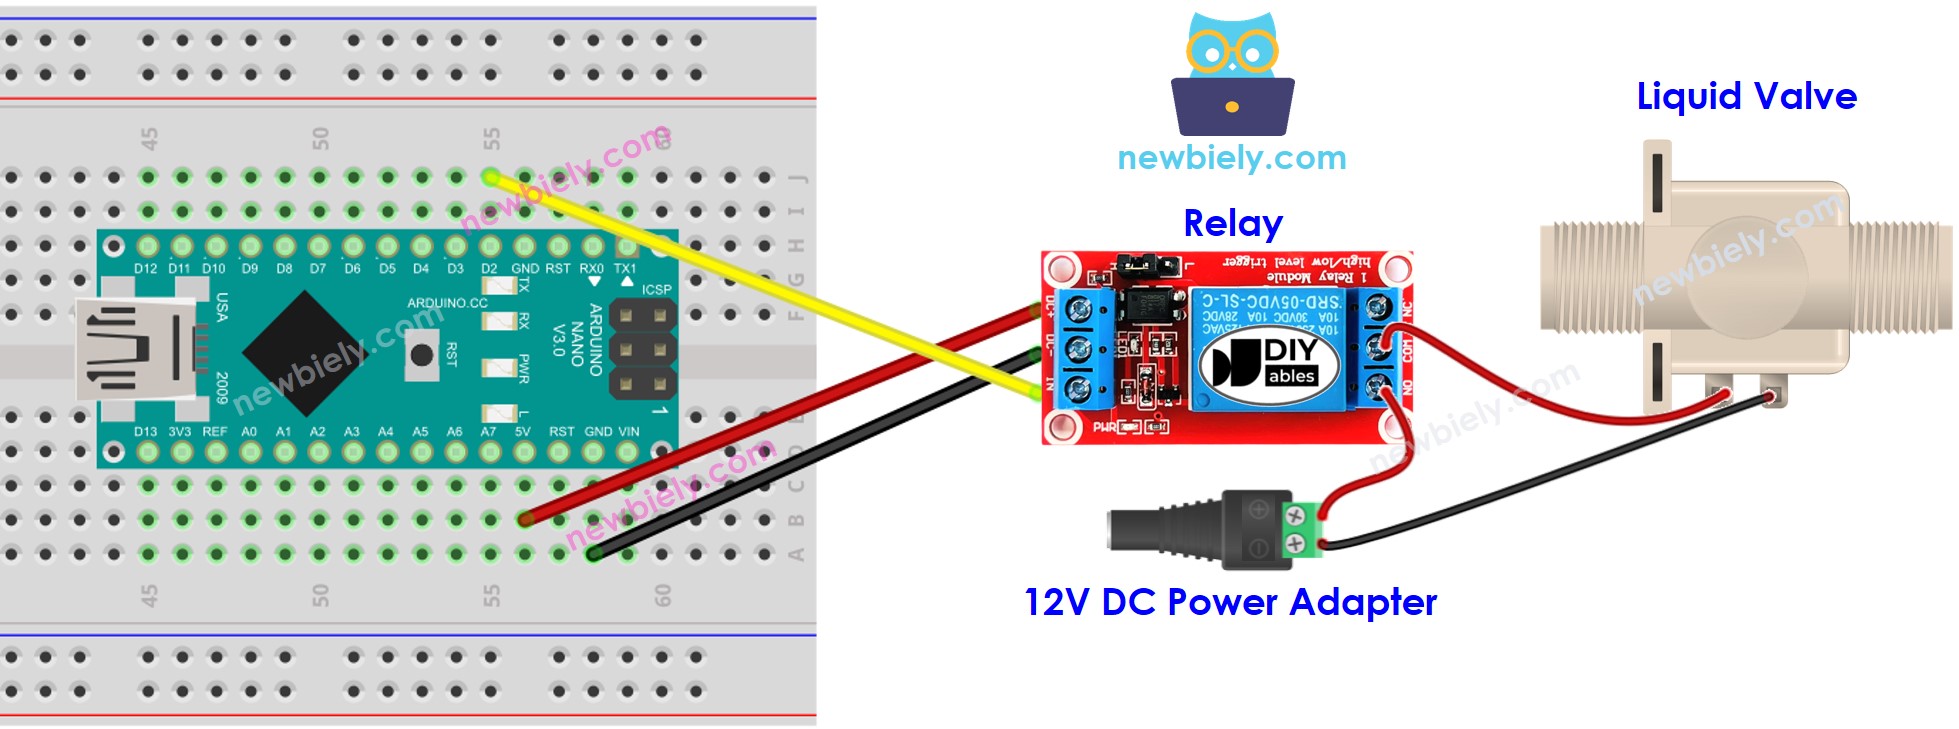 The wiring diagram between Arduino Nano and water valve